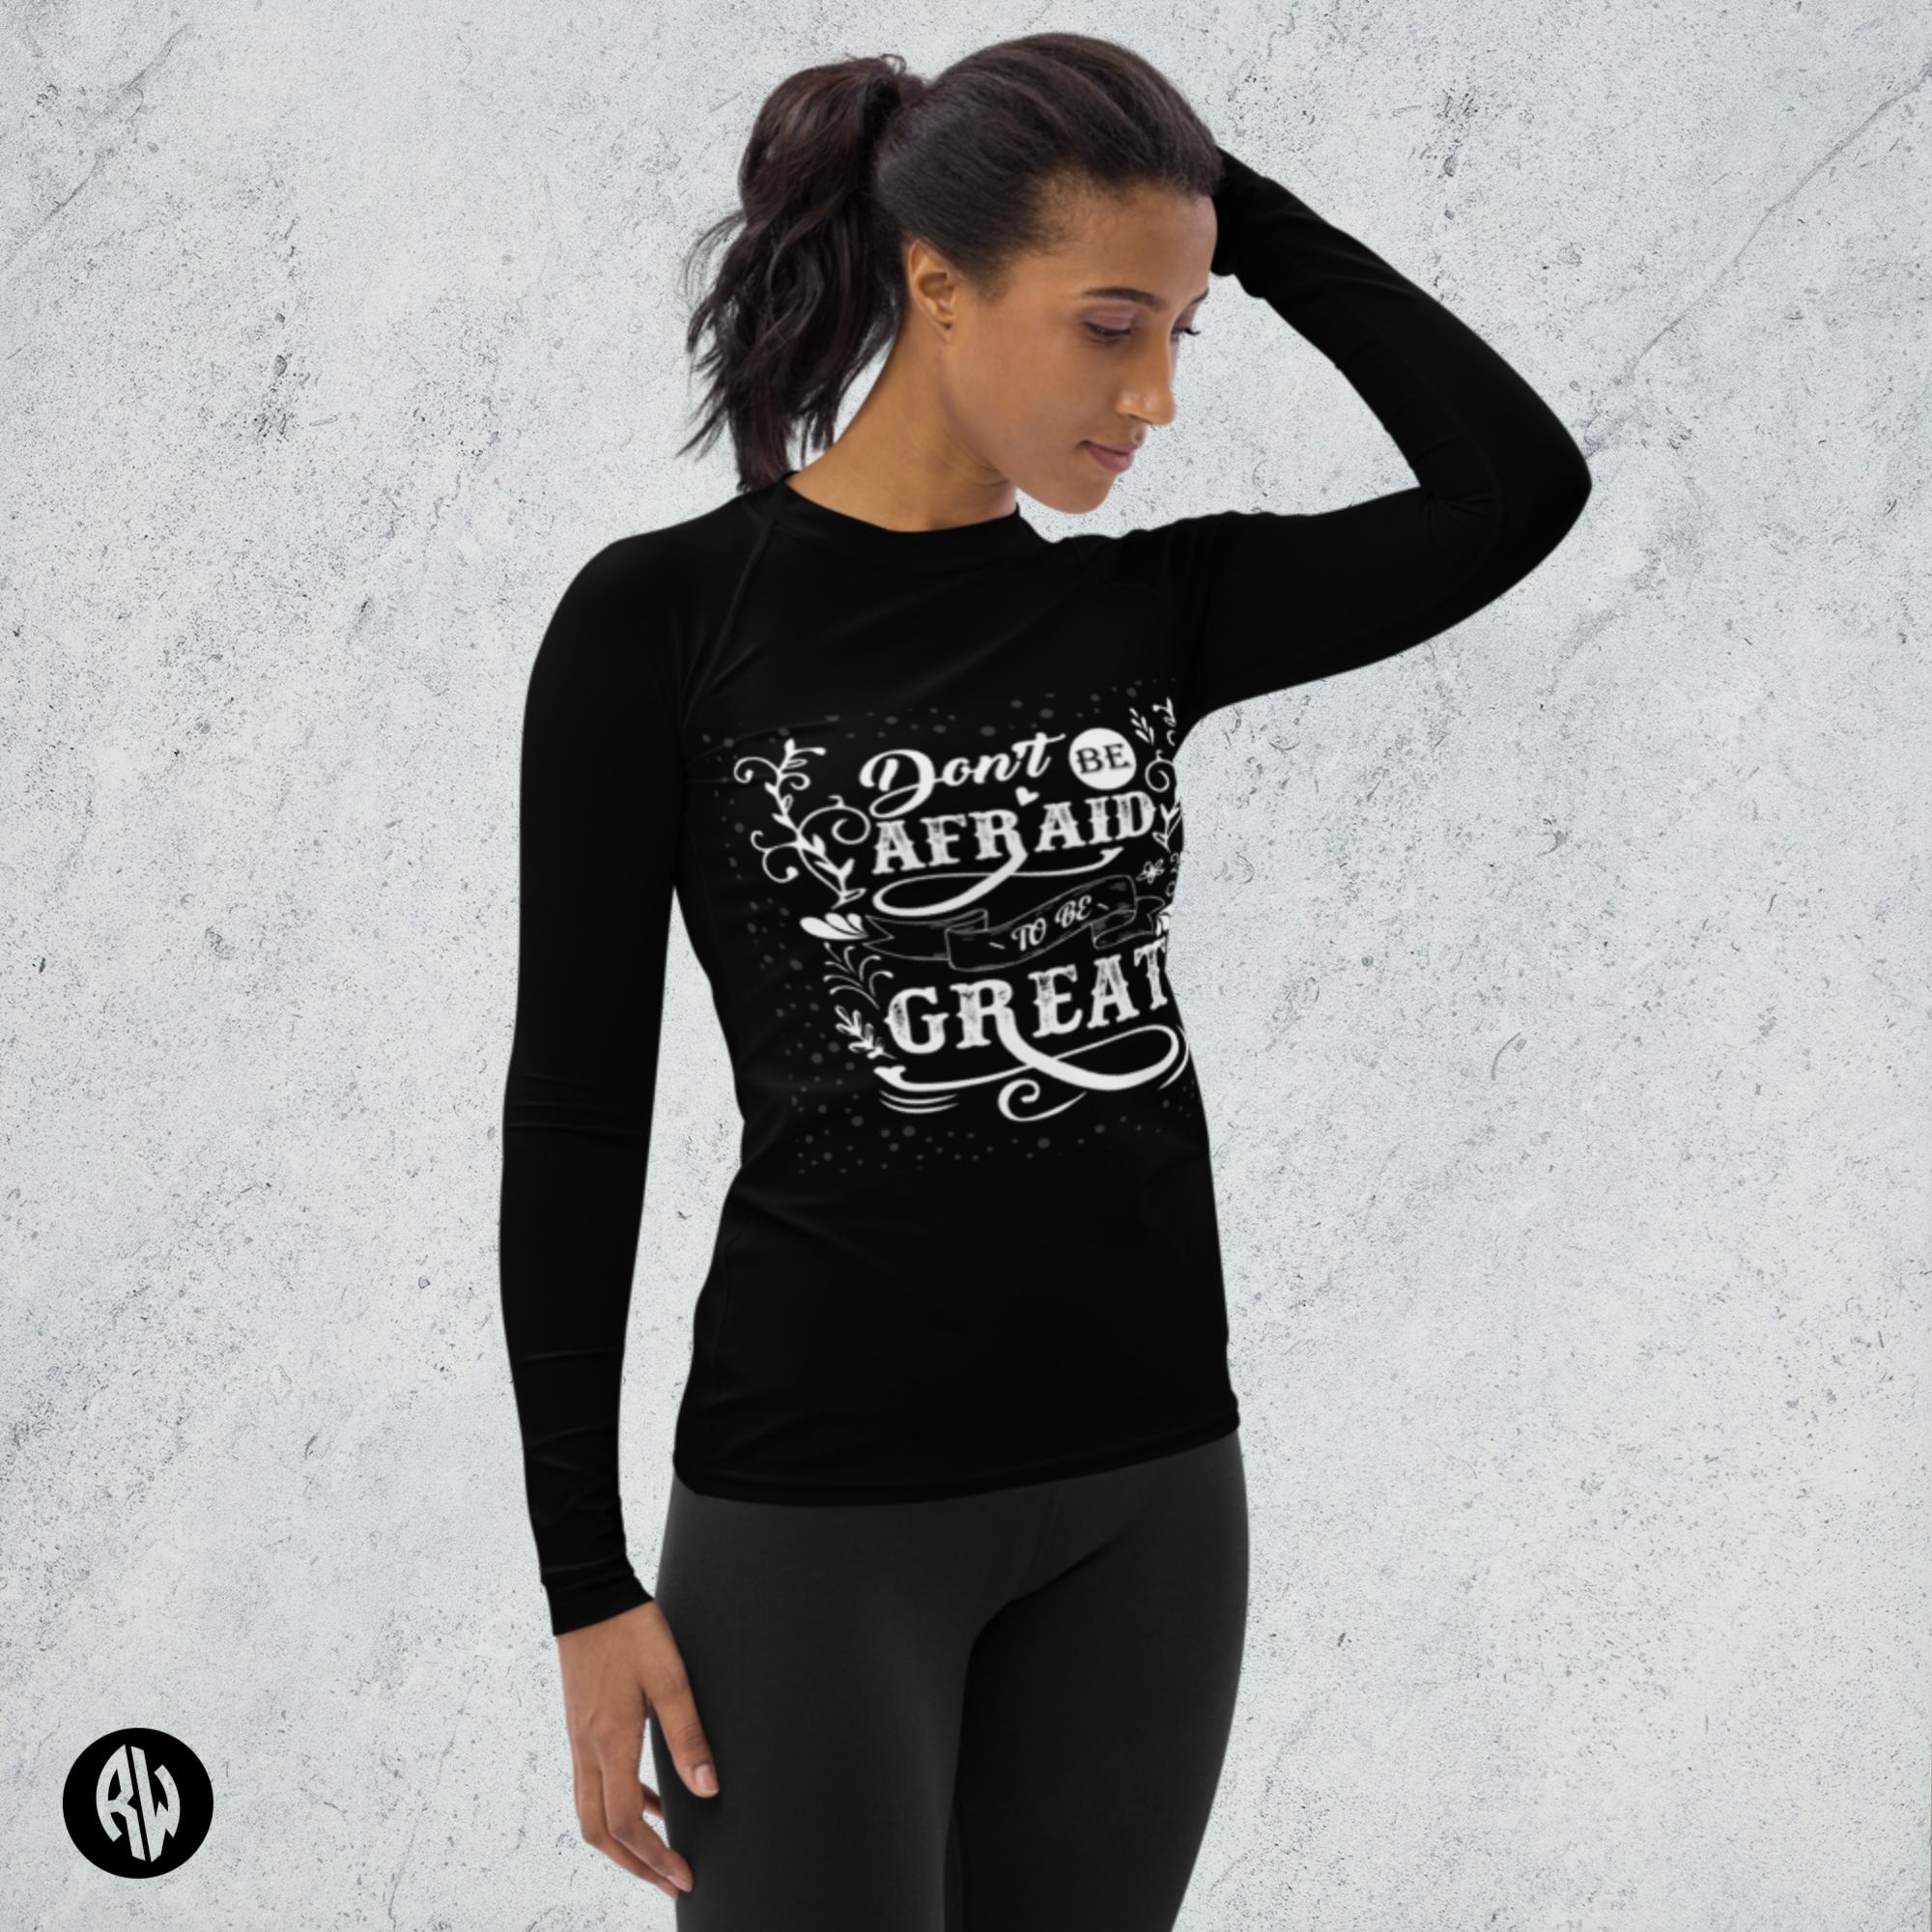 Women's Rash Long Sleeve Top in black with white print. Can be worn for swimming, covering up on a hot summer day, and perfect for keeping warm on cooler days.